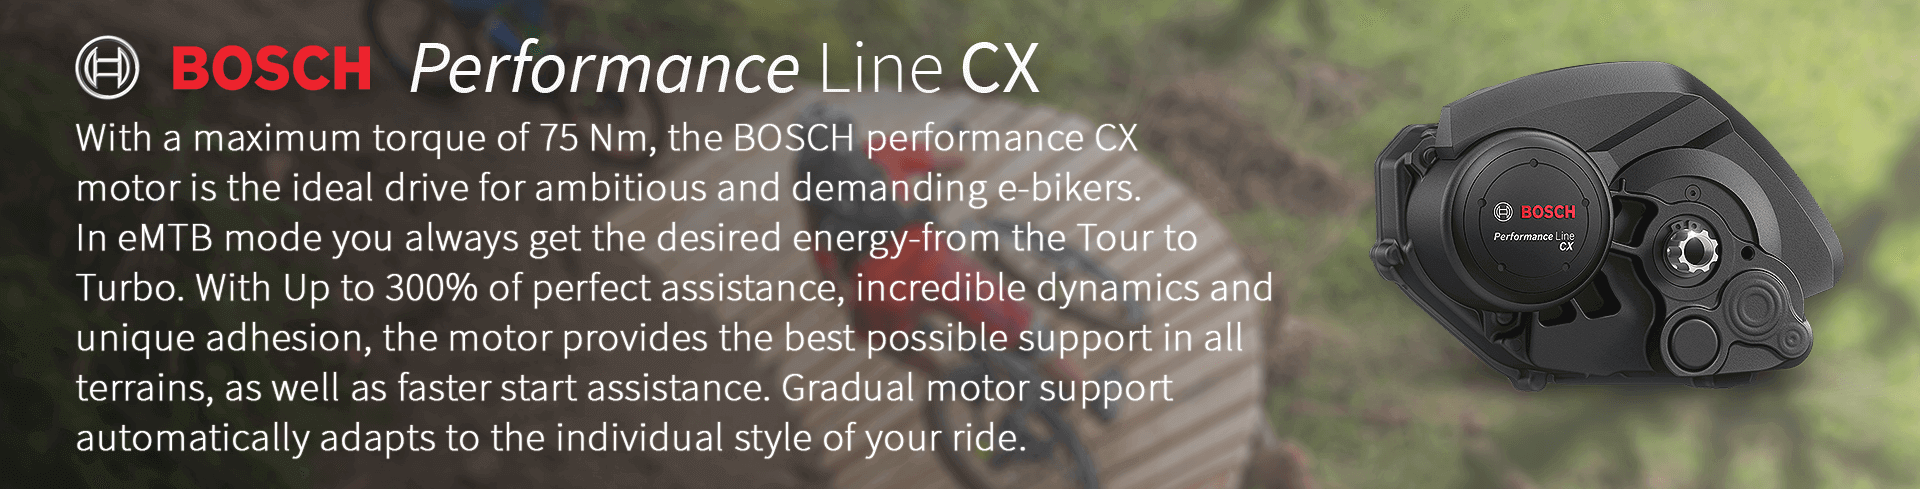 With a maximum torque of 75 Nm, the BOSCH performance CX  motor is the ideal drive for ambitious and demanding e-bikers.  In eMTB mode you always get the desired energy-from the Tour to  Turbo. With Up to 300% of perfect assistance, incredible dynamics and  unique adhesion, the motor provides the best possible support in all  terrains, as well as faster start assistance. Gradual motor support  automatically adapts to the individual style of your ride.